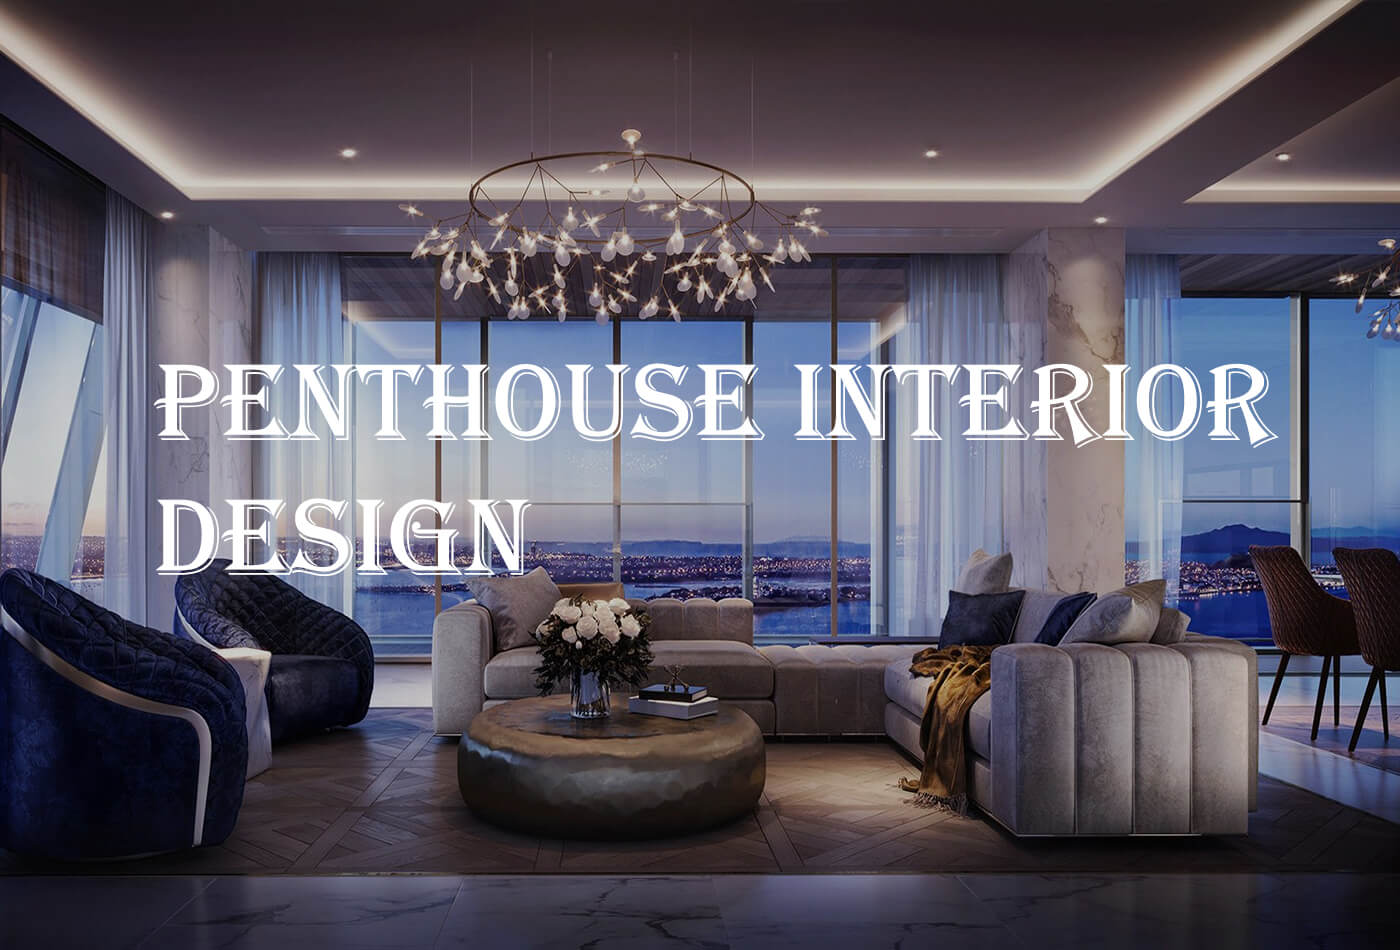 Penthouse Interior Design Ideas for Your Living Space